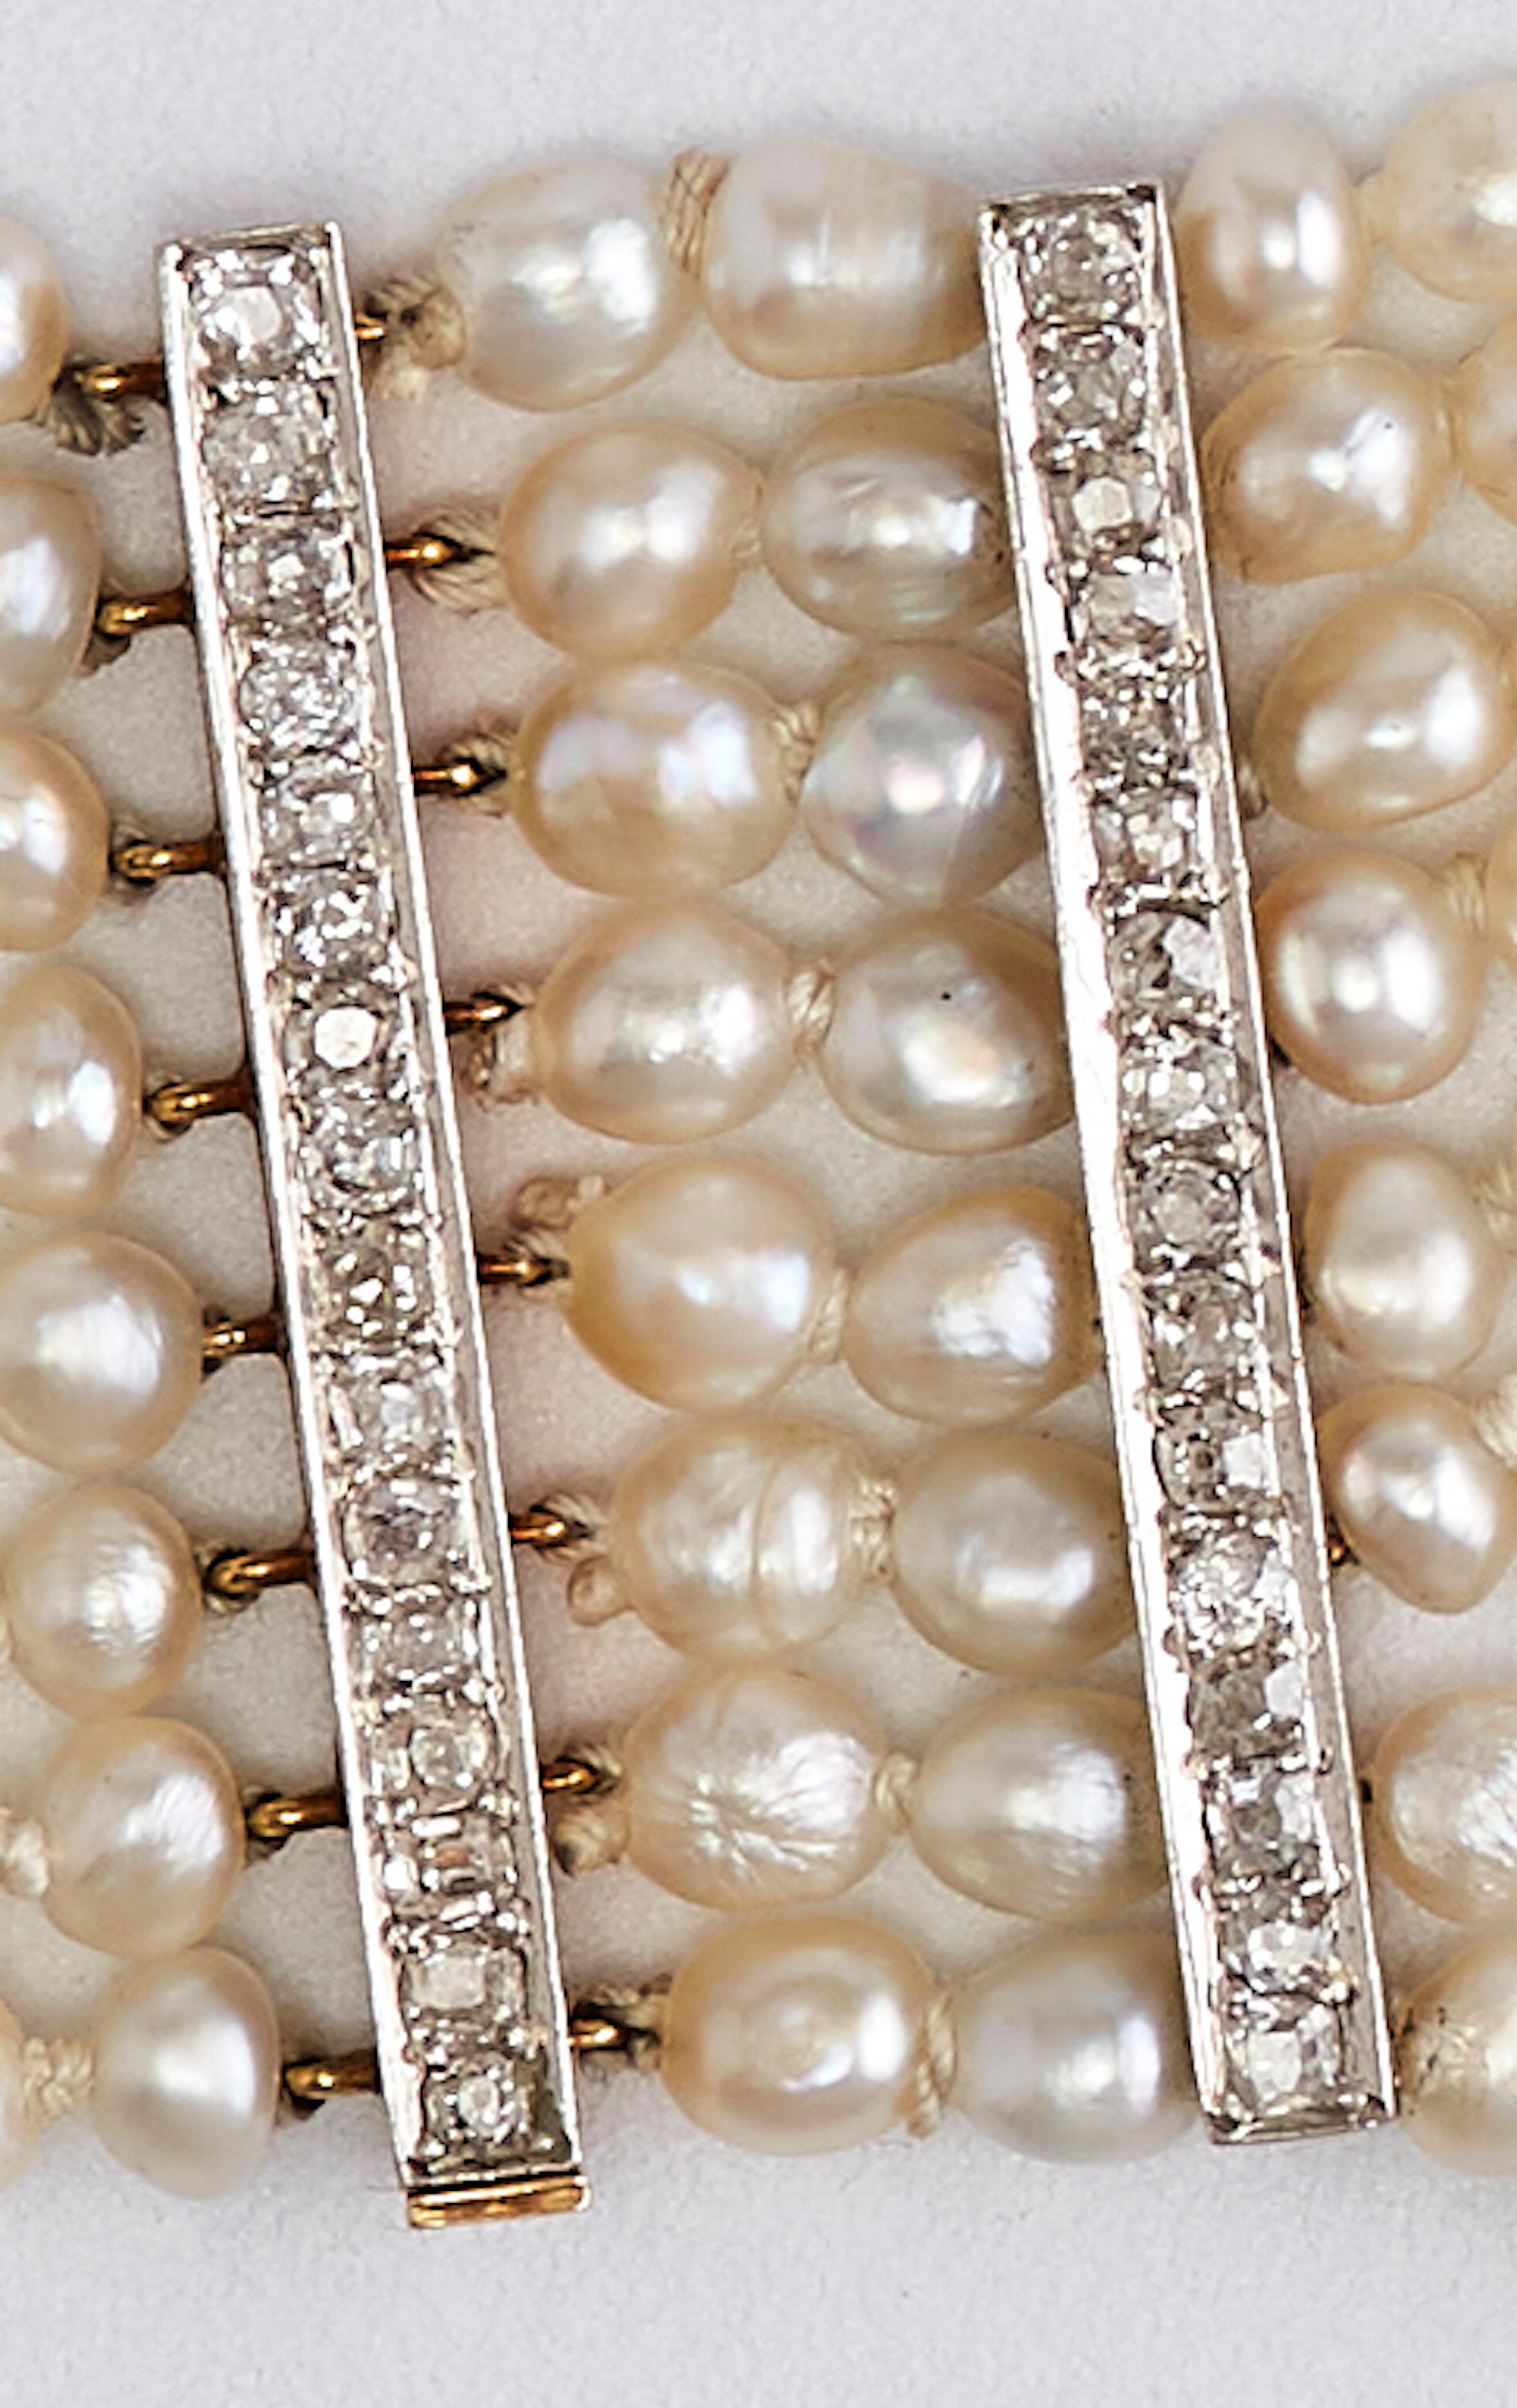 bahrain pearls for sale